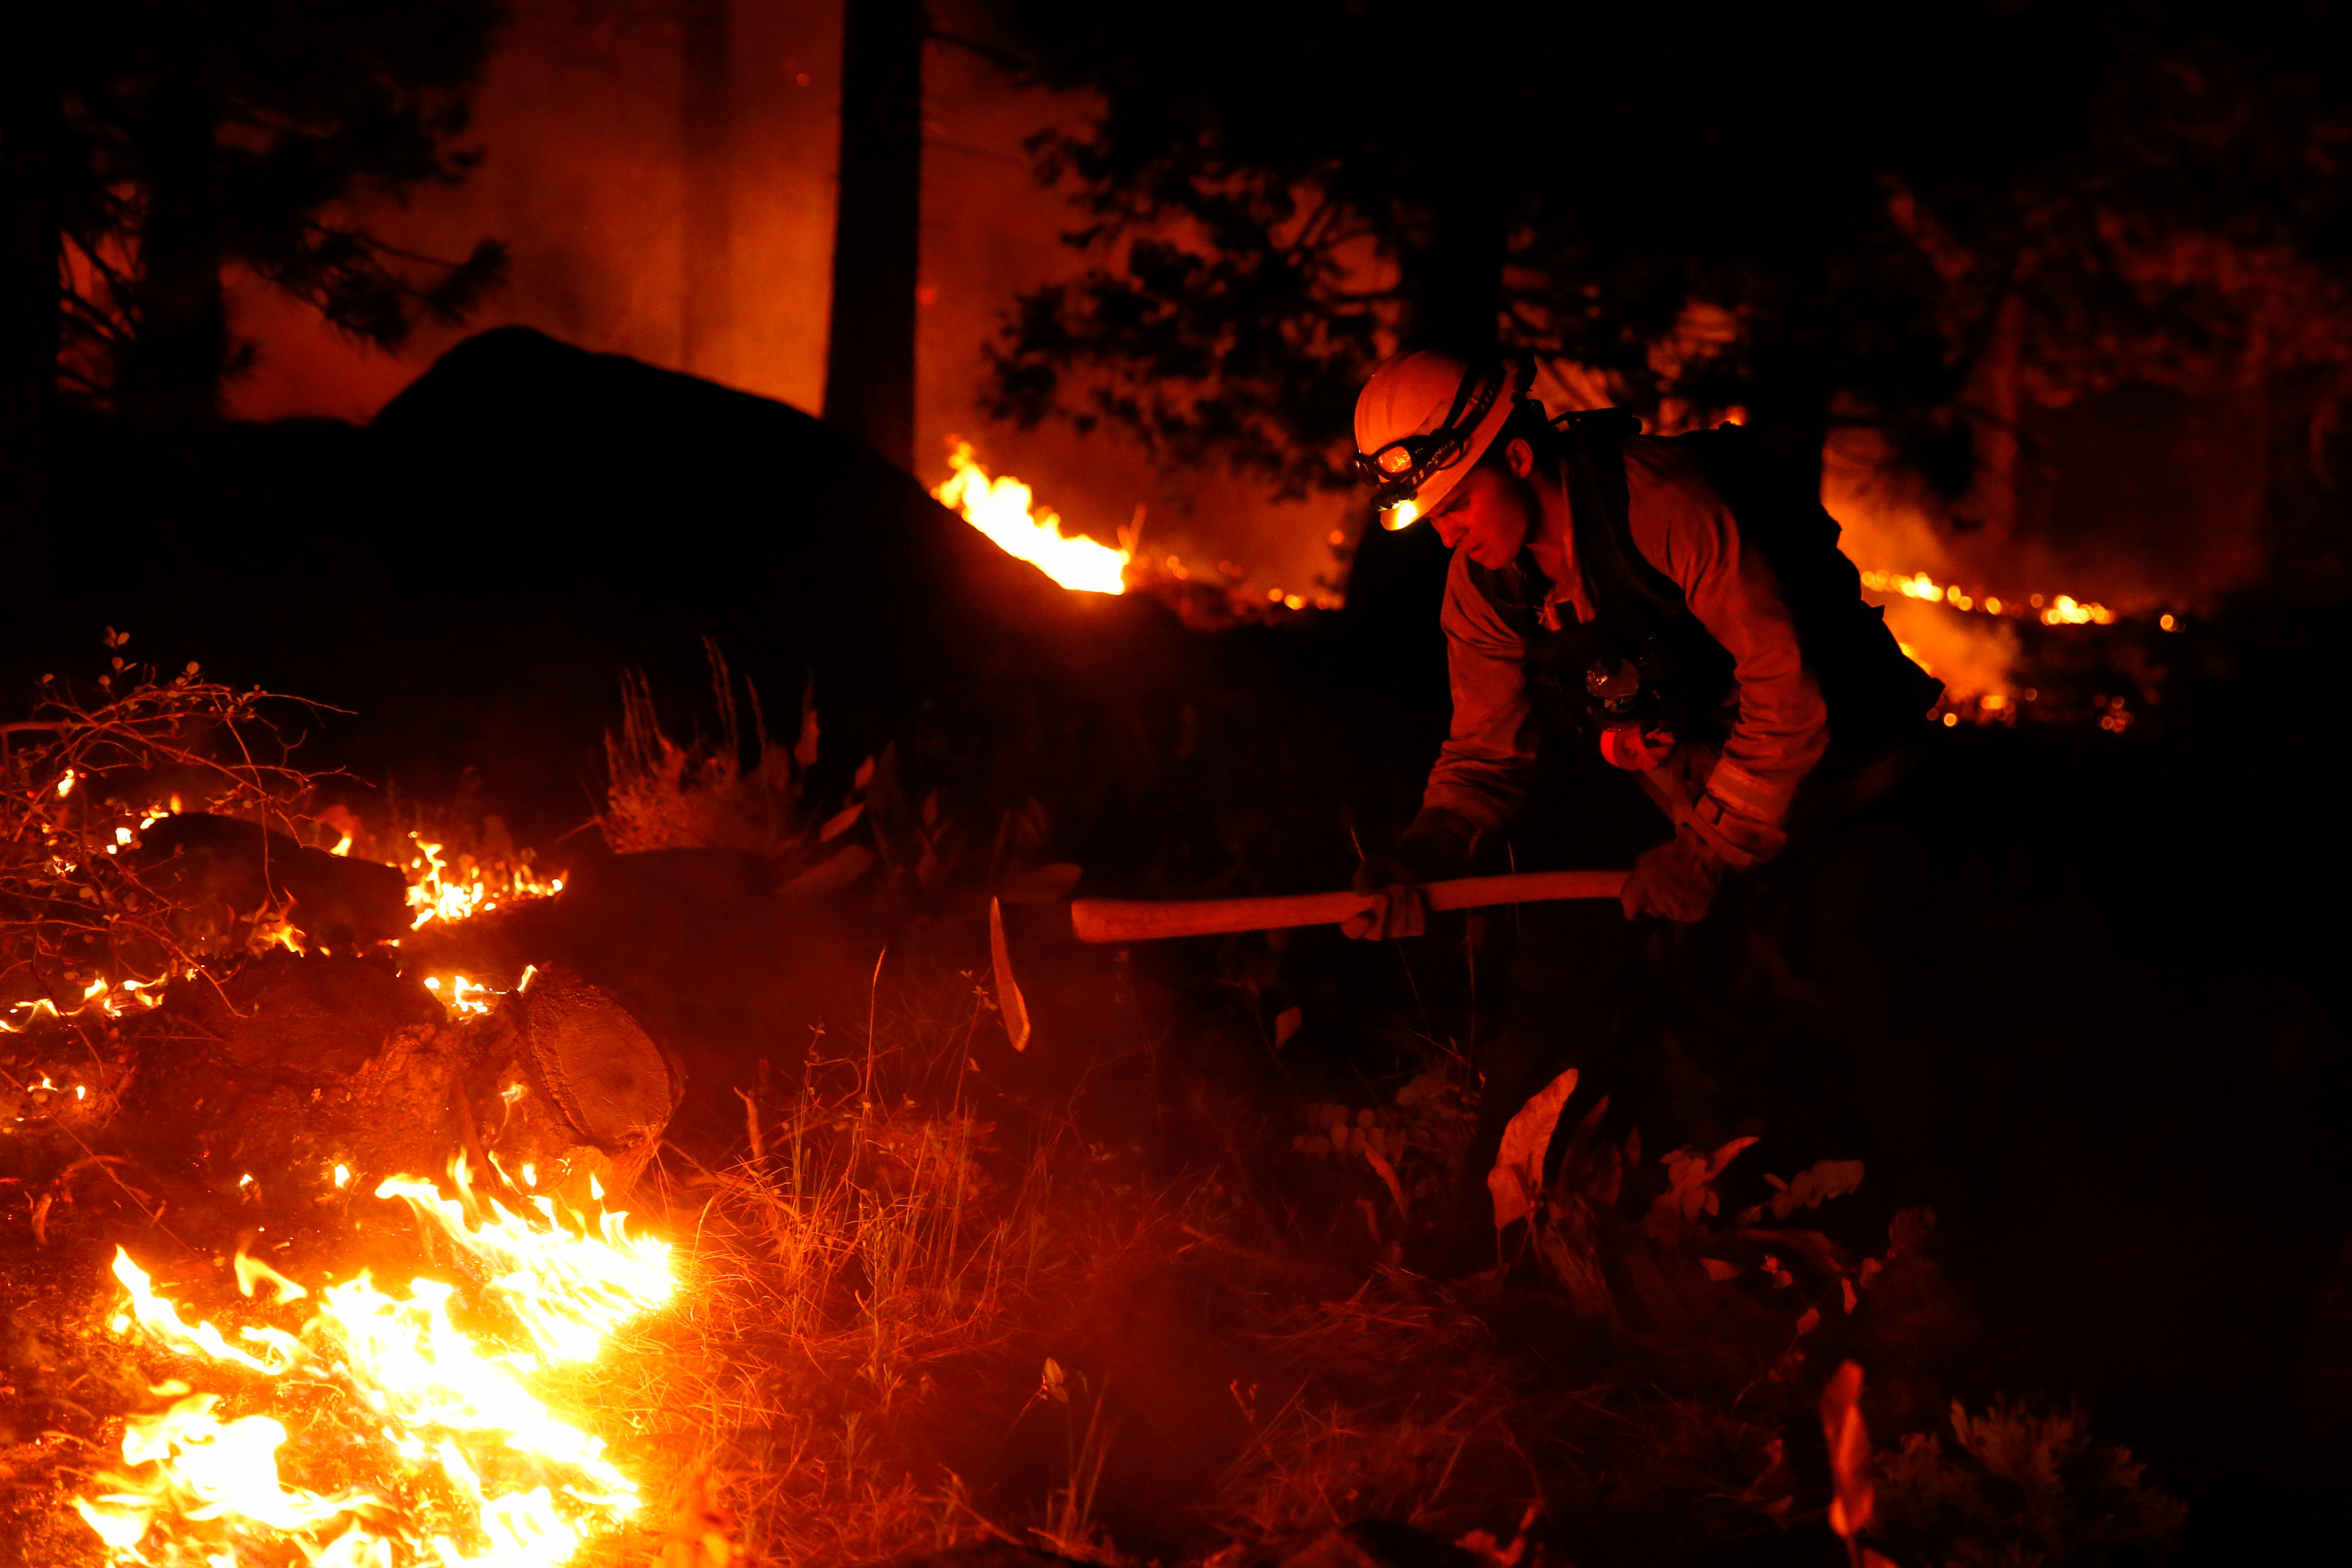 Austin Rhodes, 20, a fire fighter with the Fallen Leaf Lake Fire Department, works a hand line behind houses along Santa Clause Drive as flames from the Caldor Fire burn through trees in Christmas Valley near South Lake Tahoe, California, U.S., August 30, 2021.    REUTERS/Brittany Hosea-Small